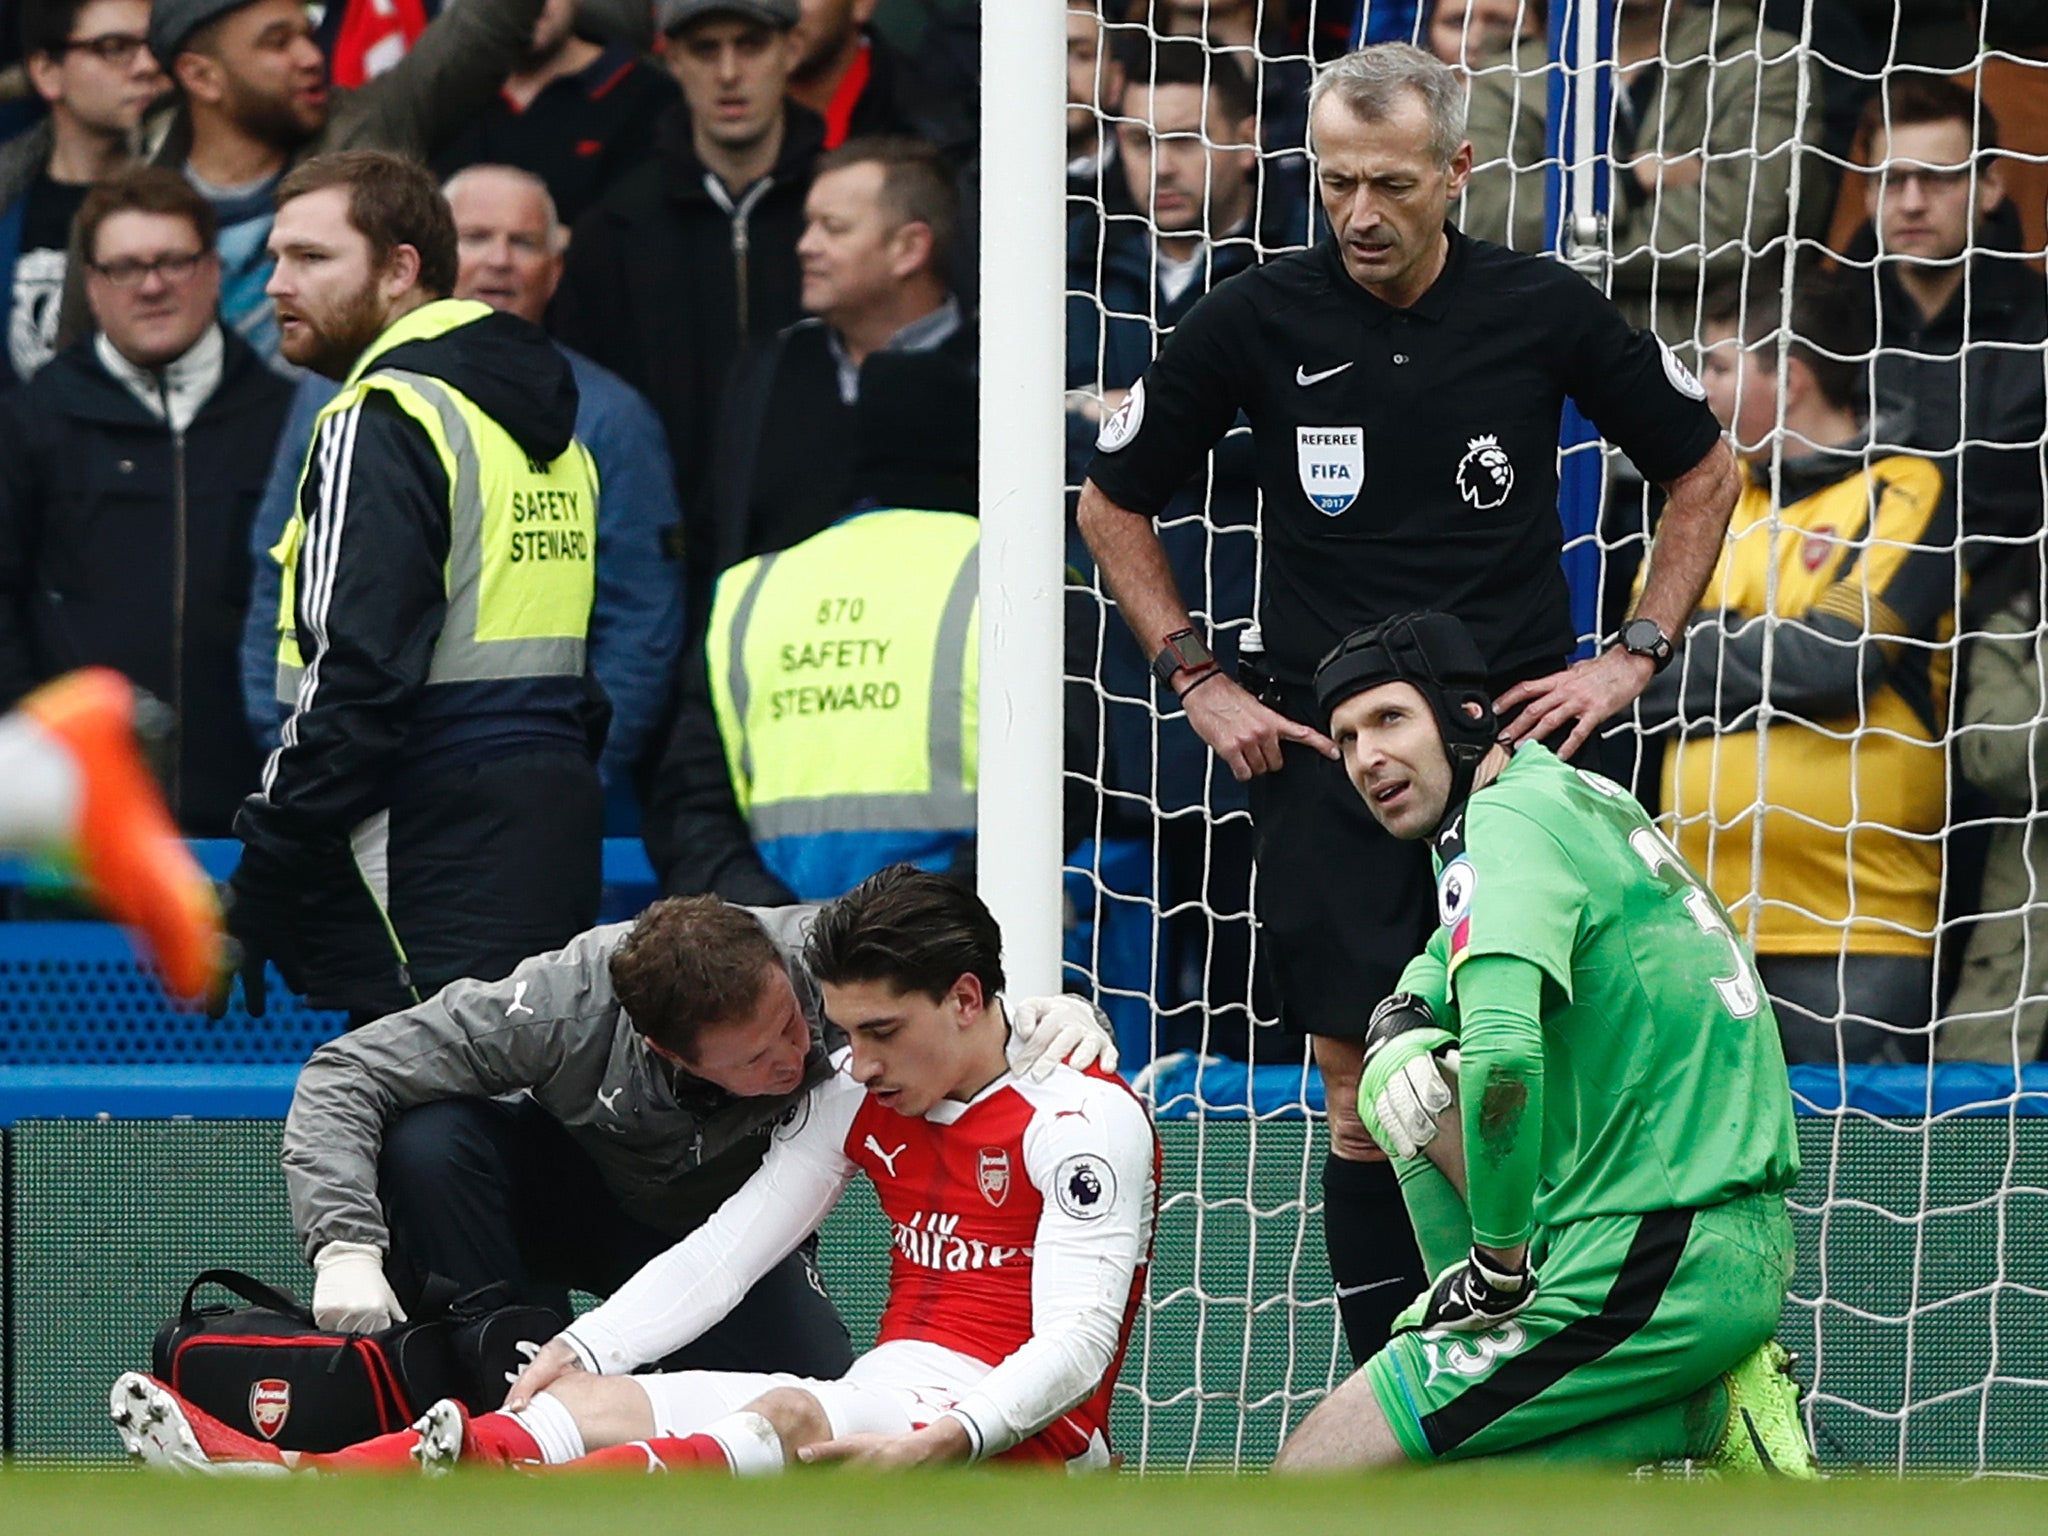 Hector Bellerin had to be substituted after taking a blow to the head against Chelsea